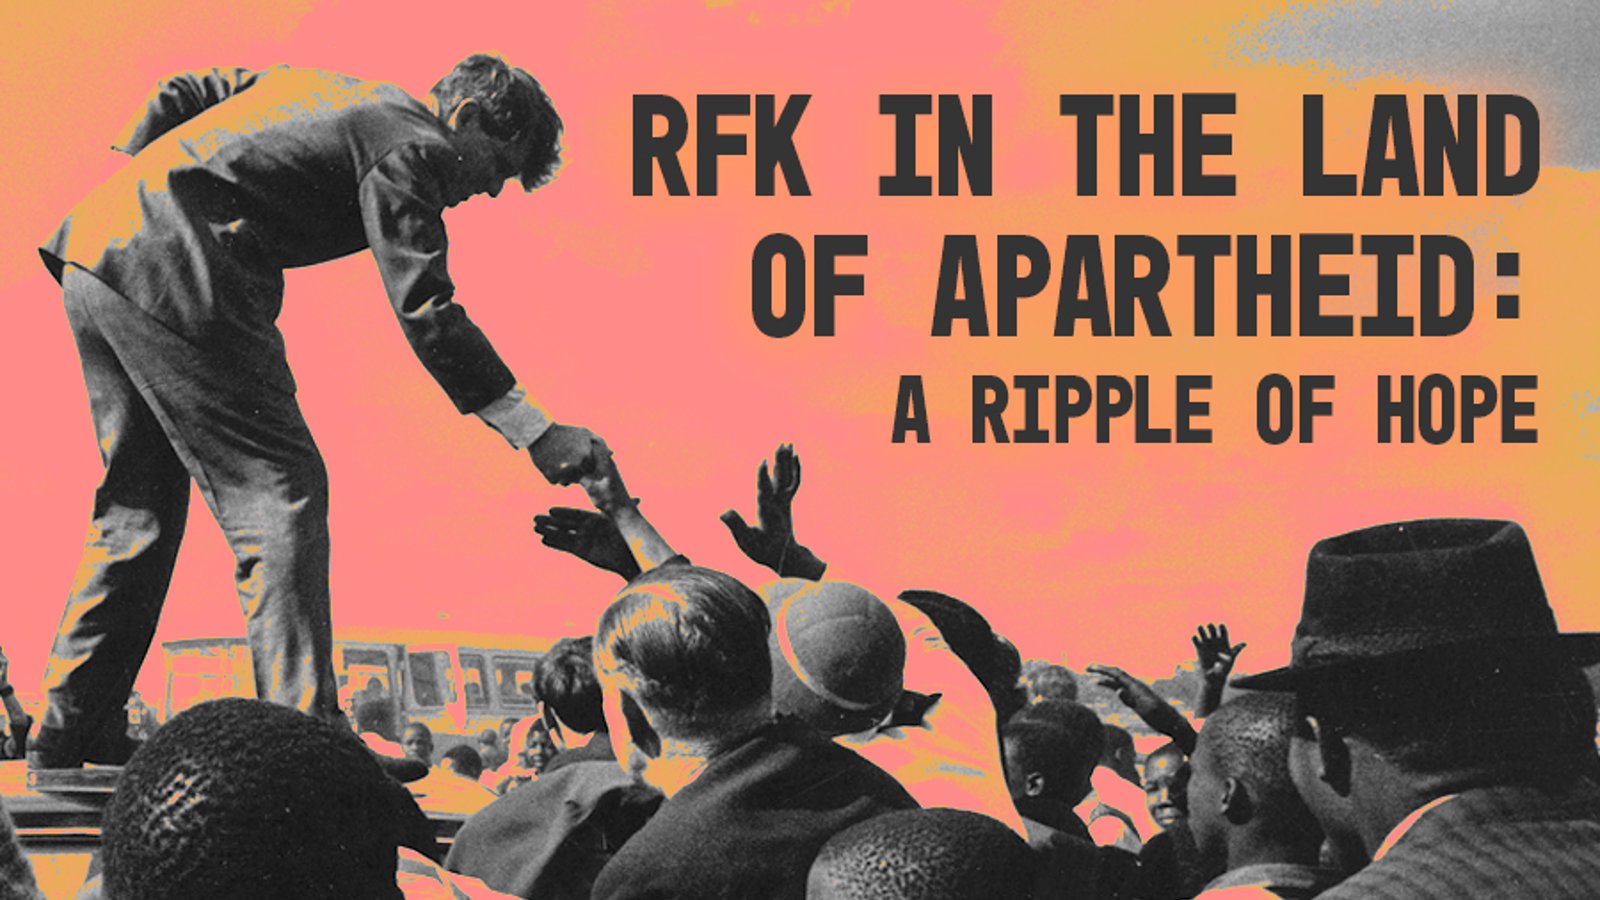 RFK in the Land of Apartheid: A Ripple of Hope